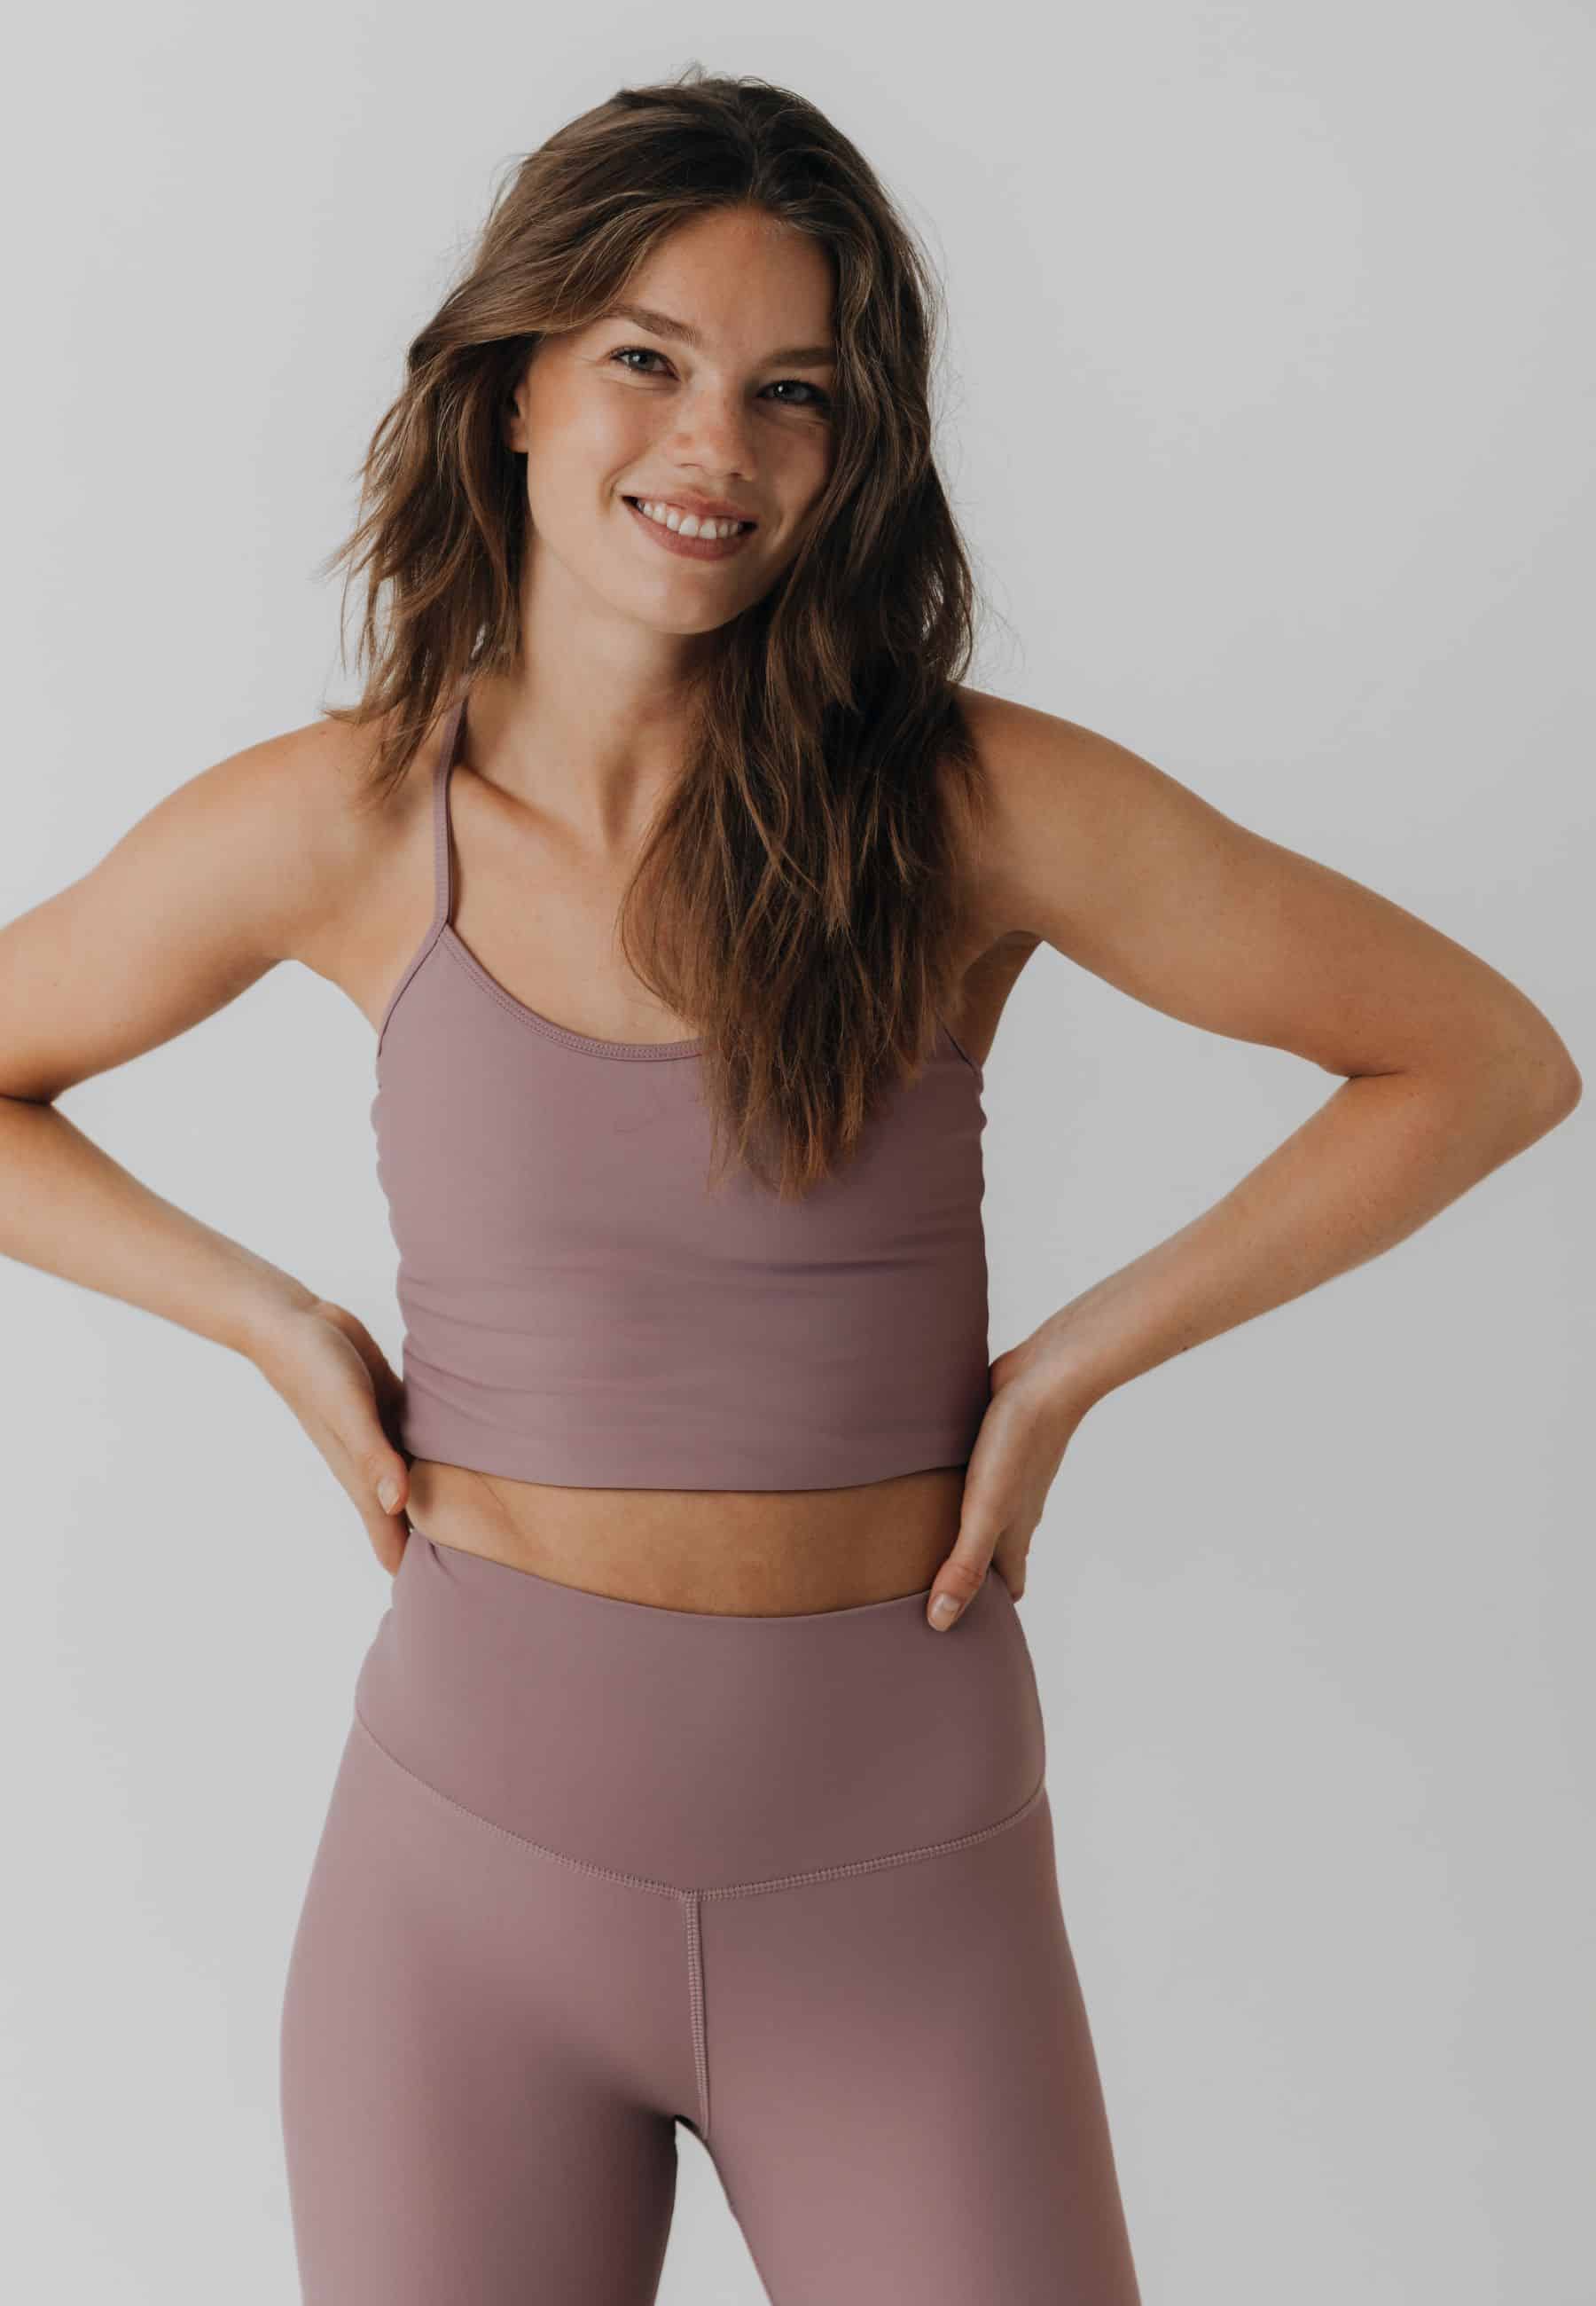 Sisterly Tribe - Yoga Singlet Top Dusky Orchid. Light support, Thin shoulder strap, minimalistic design, Buttery Soft and light, matte fabric.